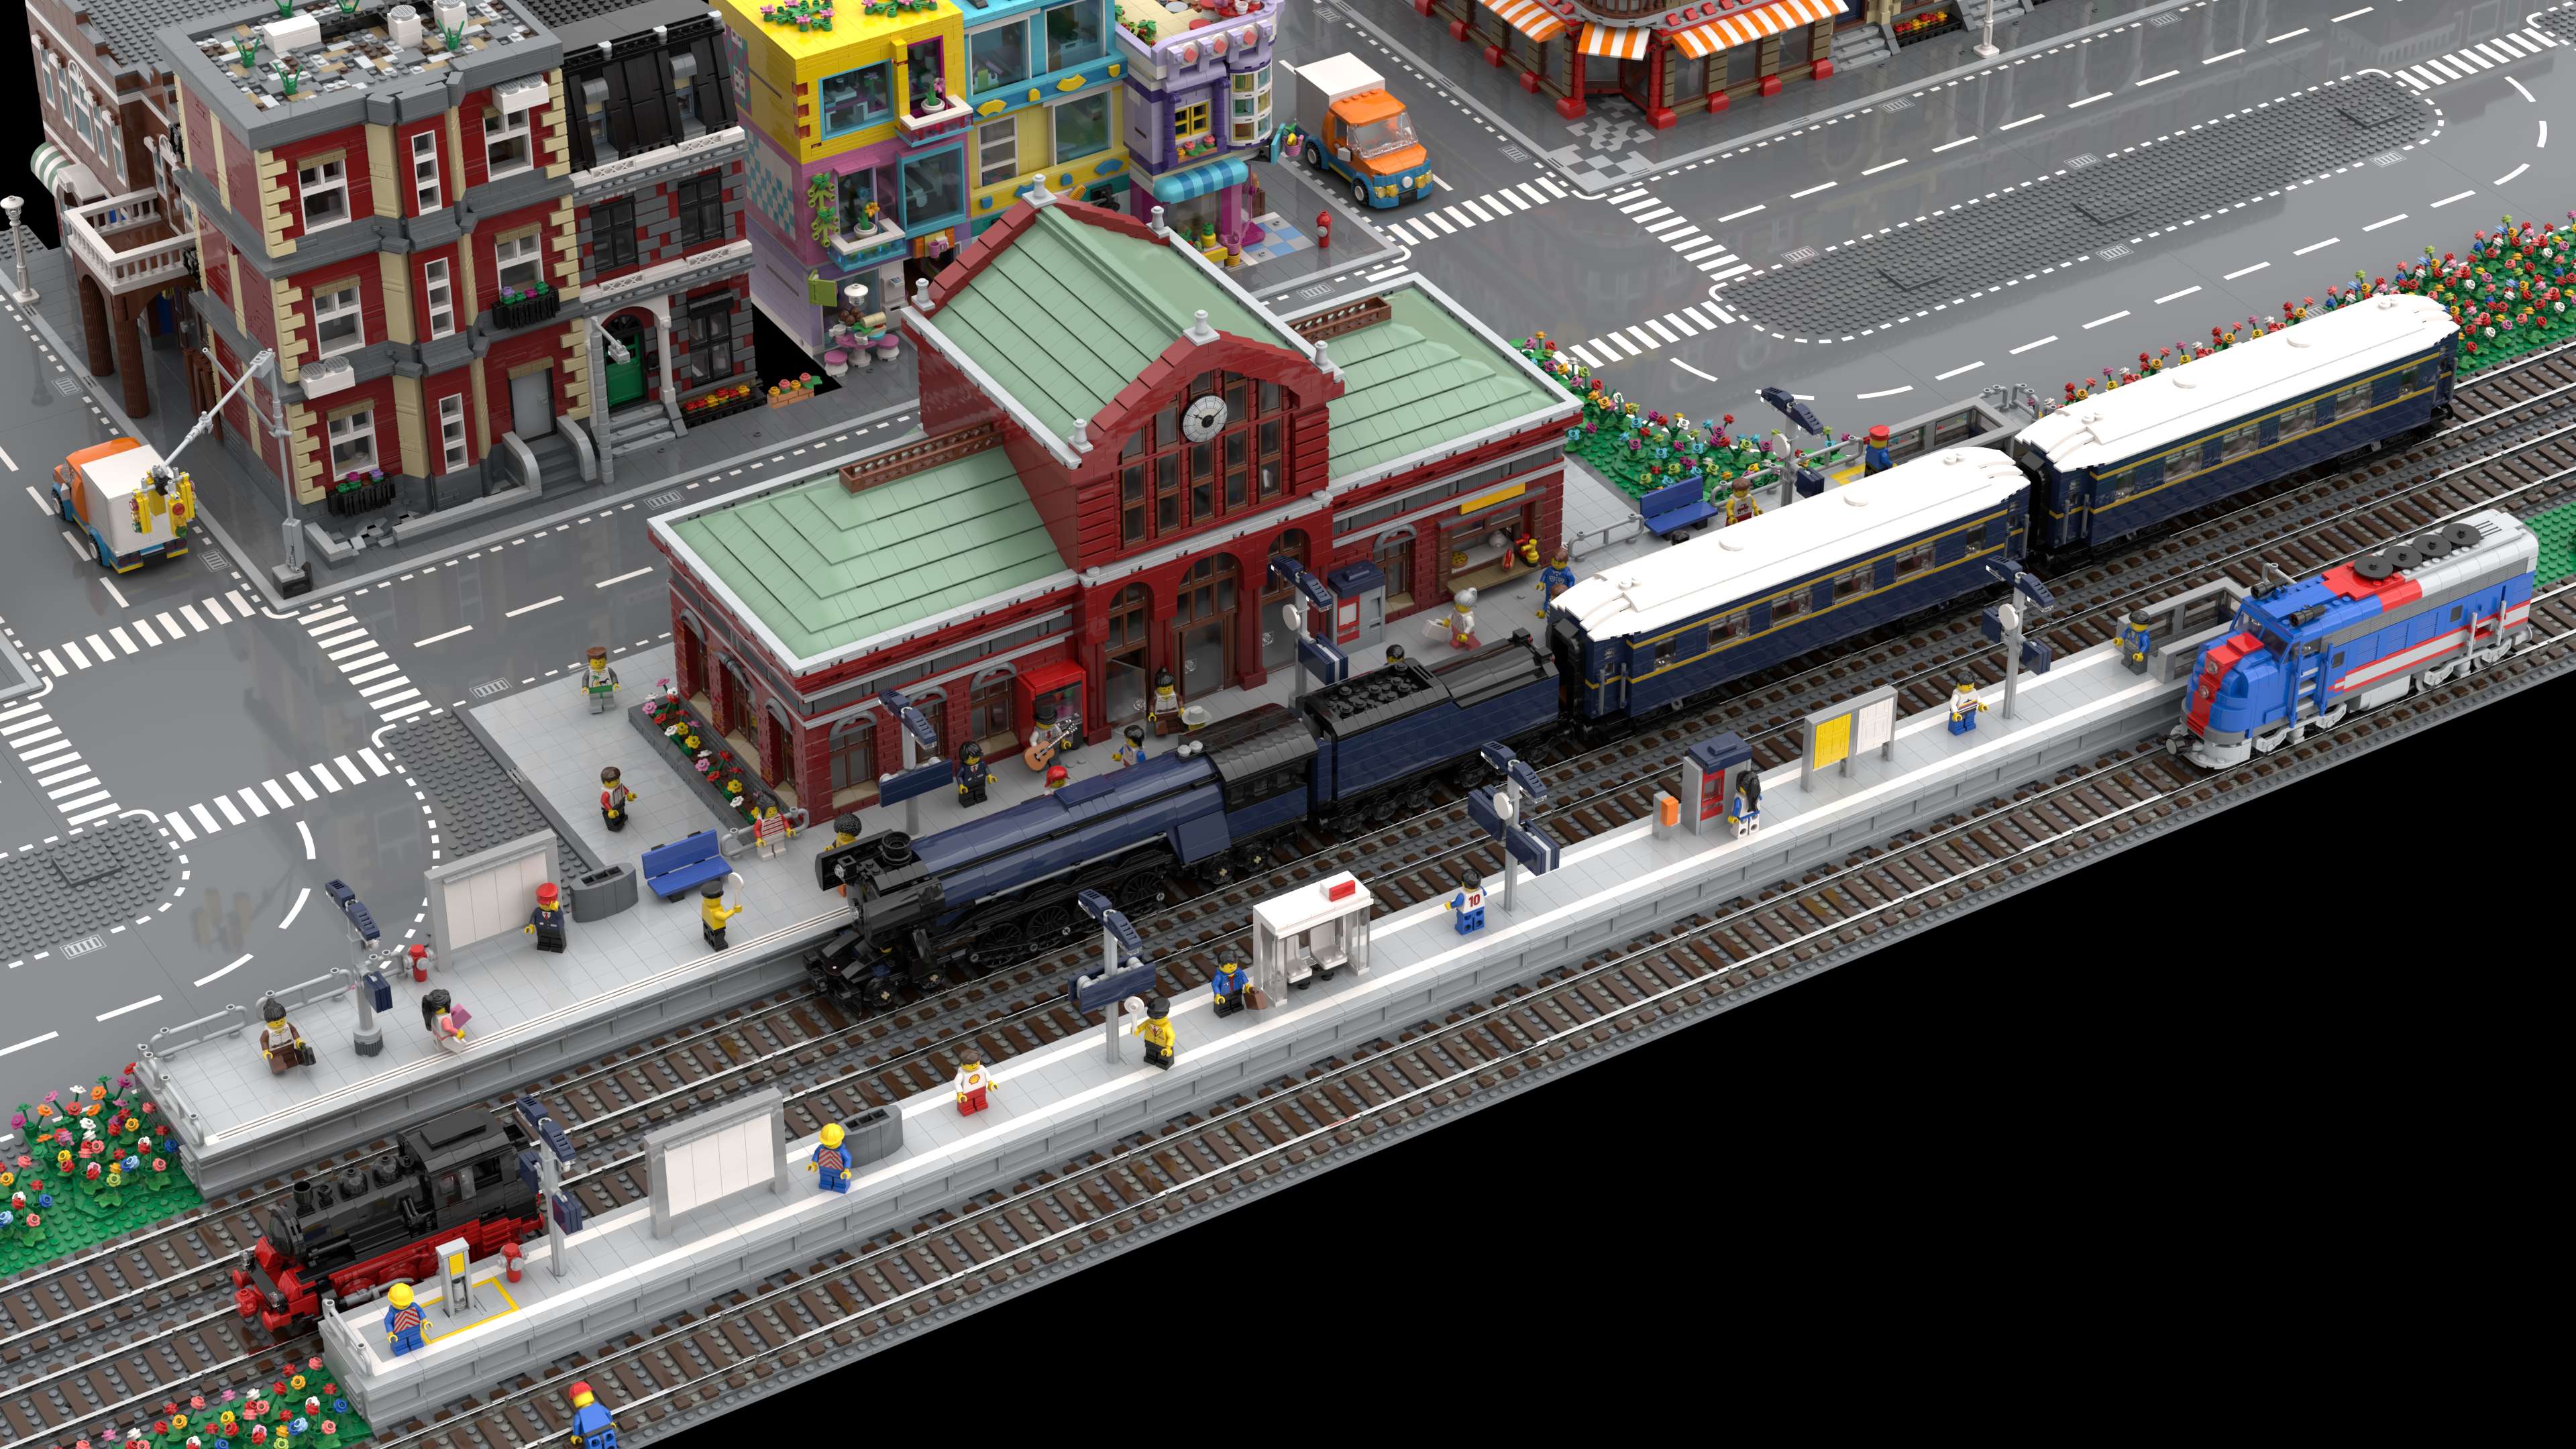 MOC-109869 Central Station V2 With 6820 Pieces